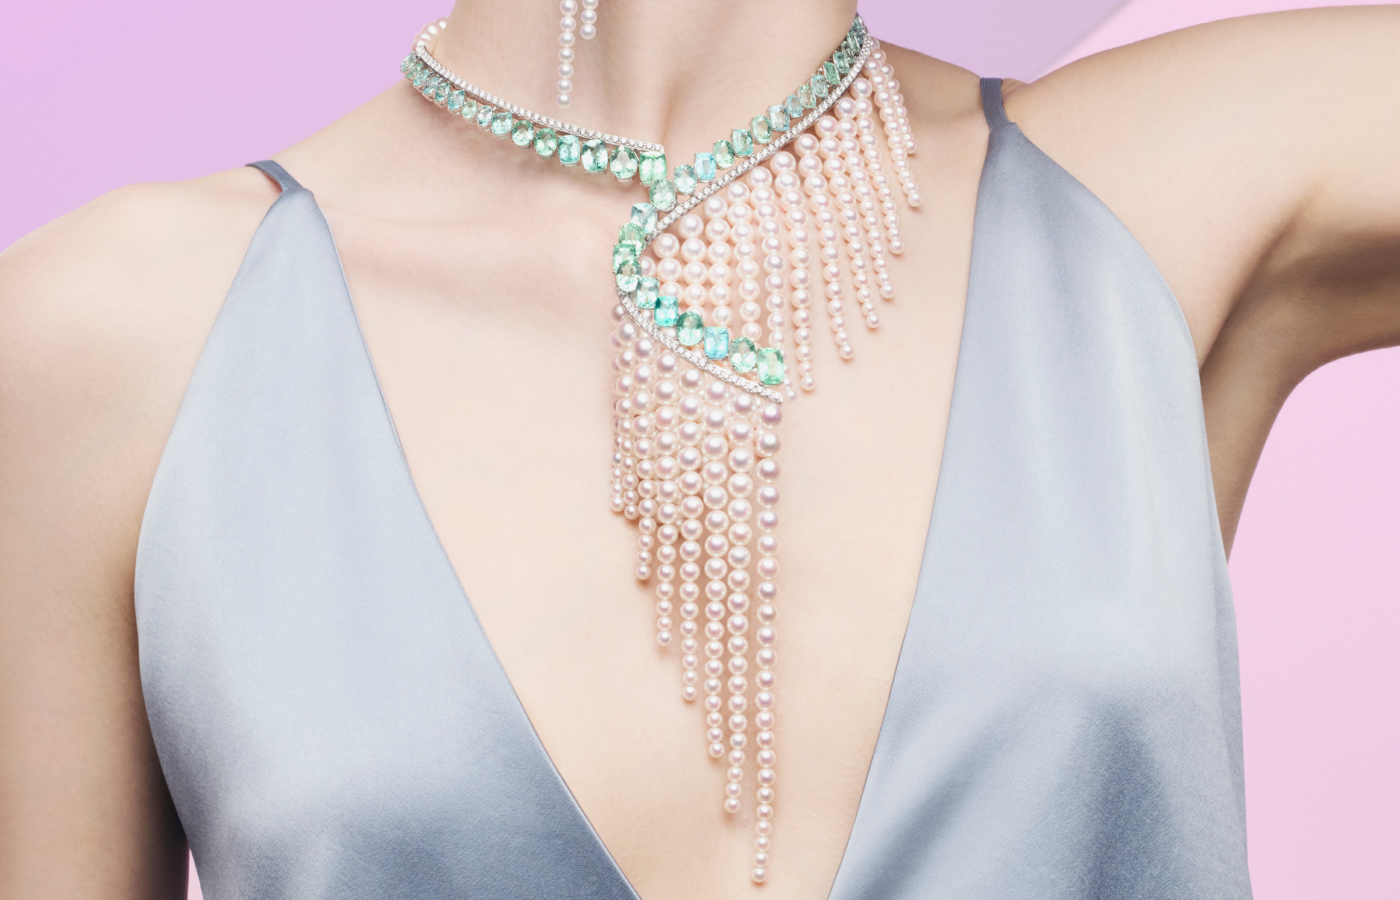 Tasaki Cascade necklace with 44 Paraiba tourmalines for a total weight of 50.08-carats, plus 5-carats of round brilliant-cut diamonds and graduating lines of Akoya pearls, from the Atelier 6 Nature Spectacle High Jewellery collection